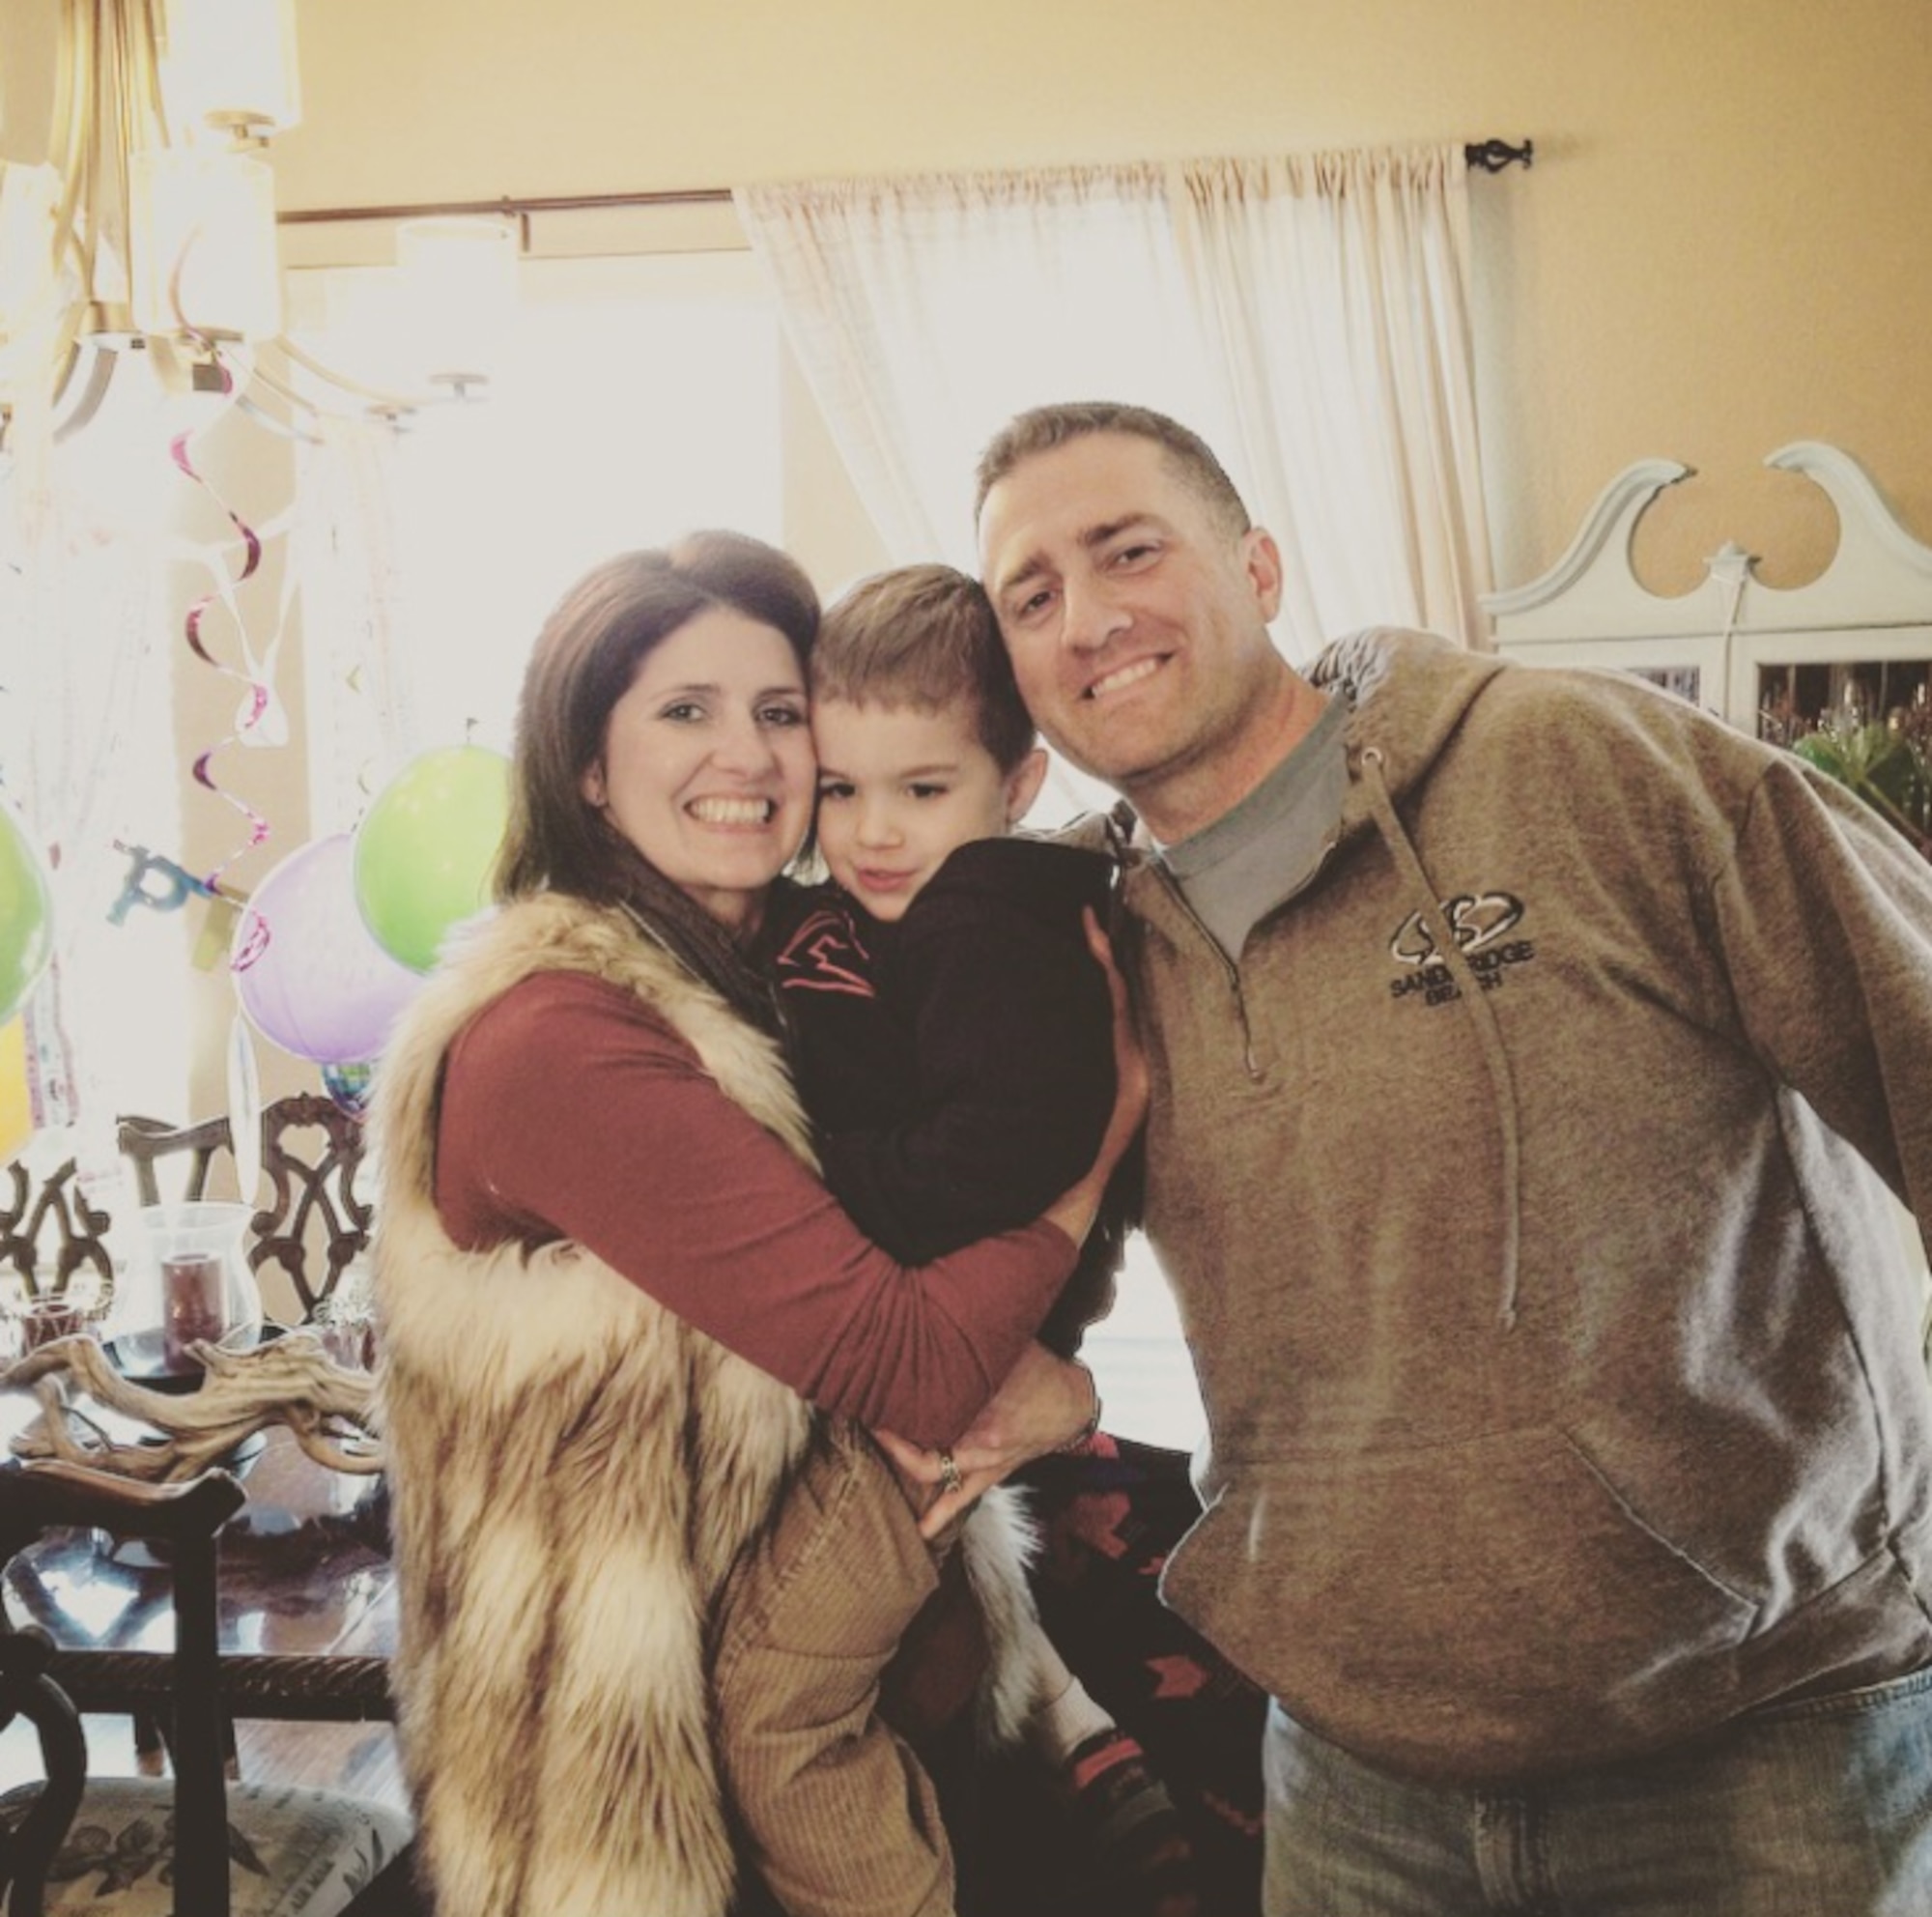 Dawson Stock, pictured here with his parents, Jennifer Stock and Maj. Michael Stock. Dawson was diagnosed with autism weeks before his 3rd birthday. He is currently enrolled in speech therapy, occupational therapy and applied behavior analysis through TRICARE. (Courtesy Photo)